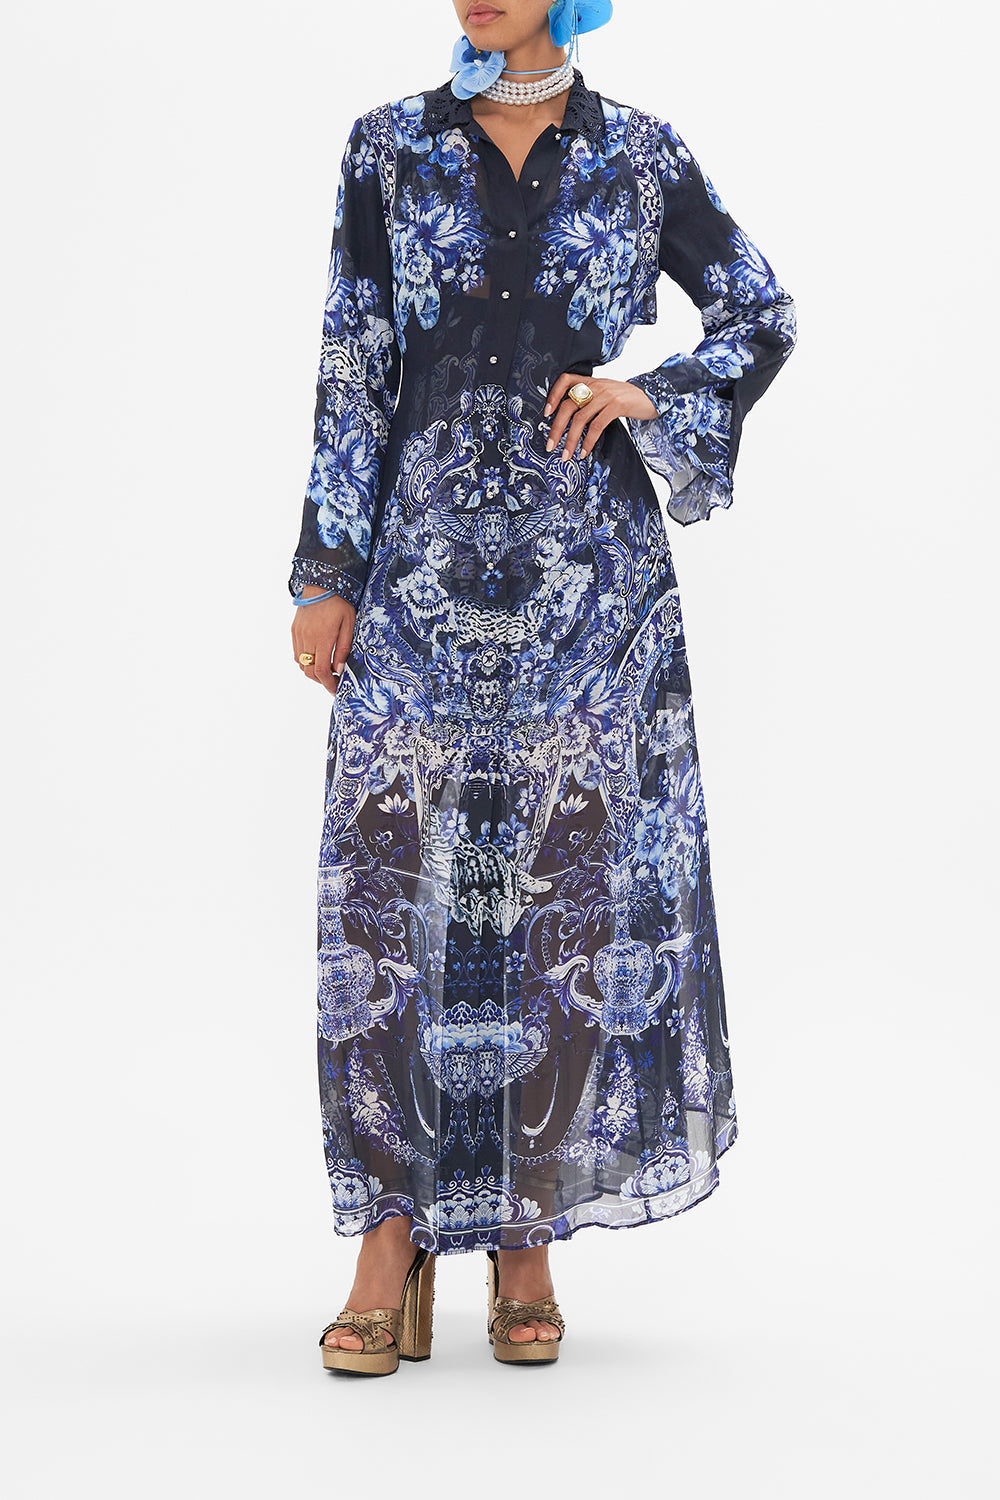 Front view of model wearing CAMILLA silk trench in Delft Dynasty print